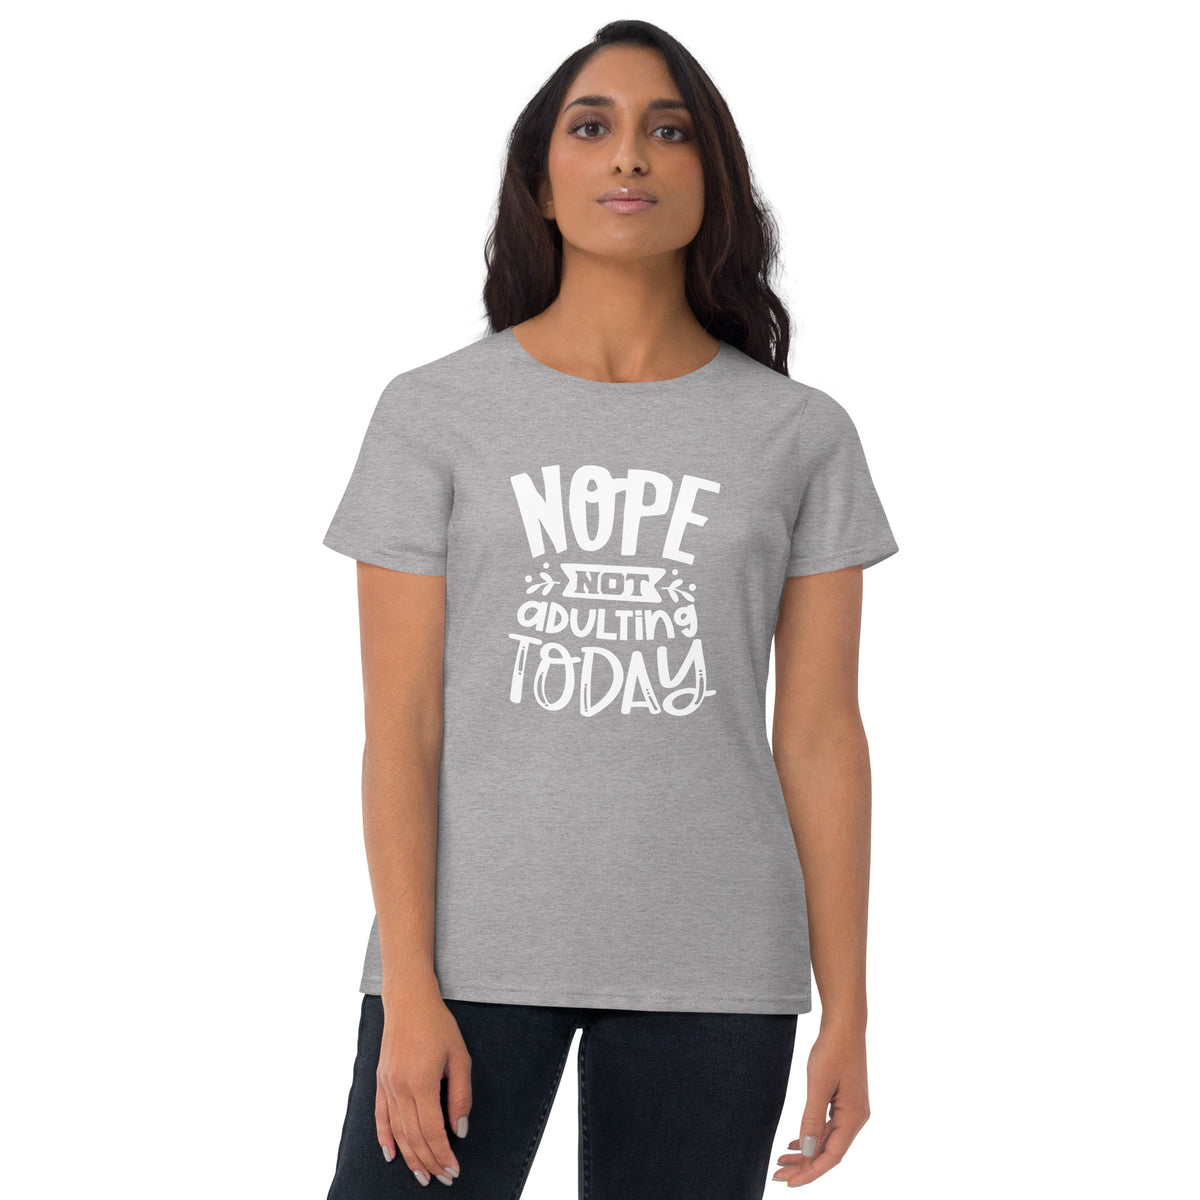 Nope Not Adulting Today Women's Short Sleeve T-Shirt